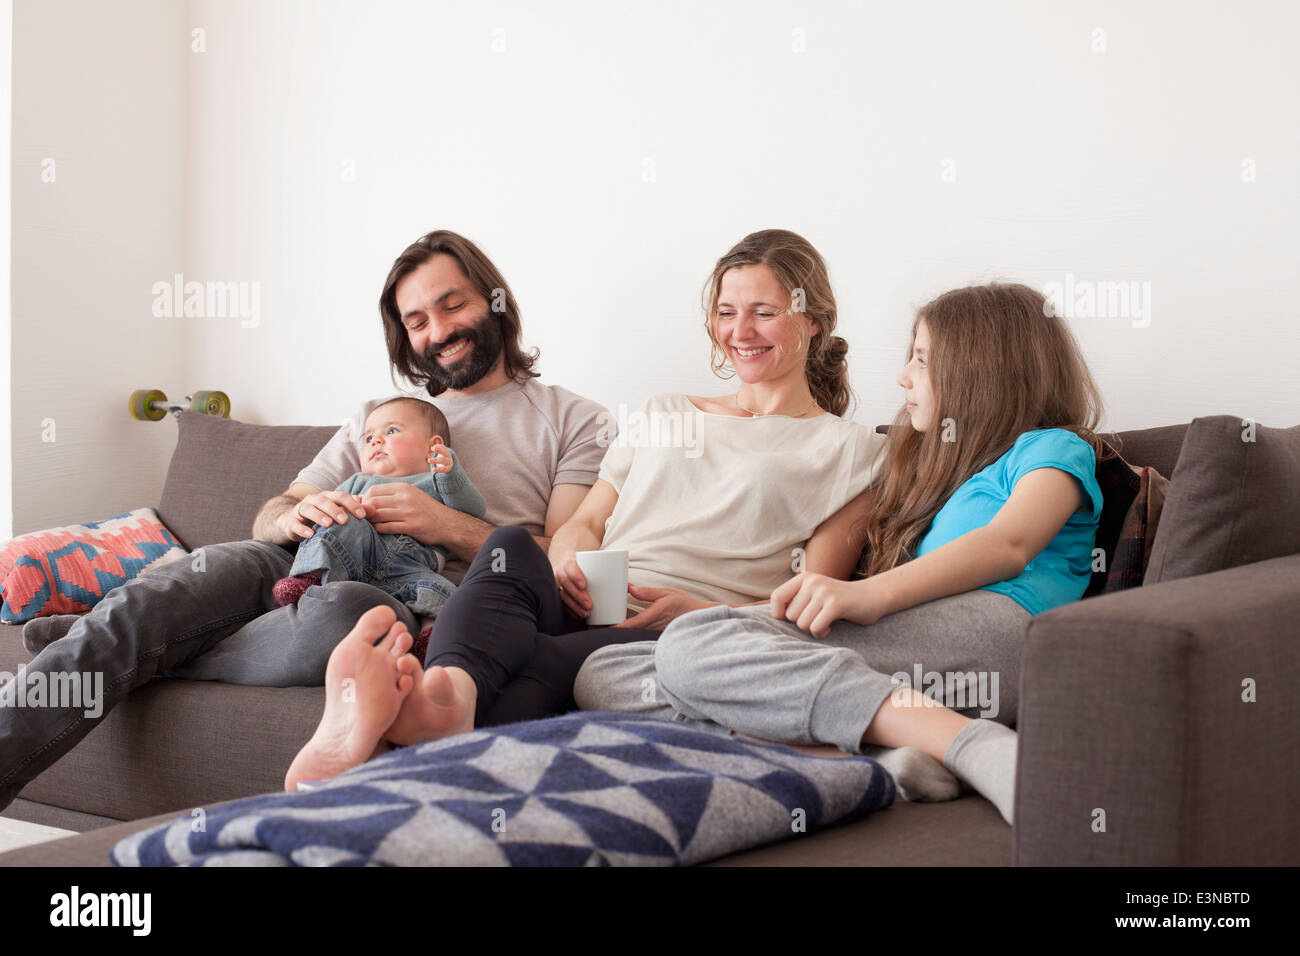 Happy family spending leisure time in living room Stock Photo